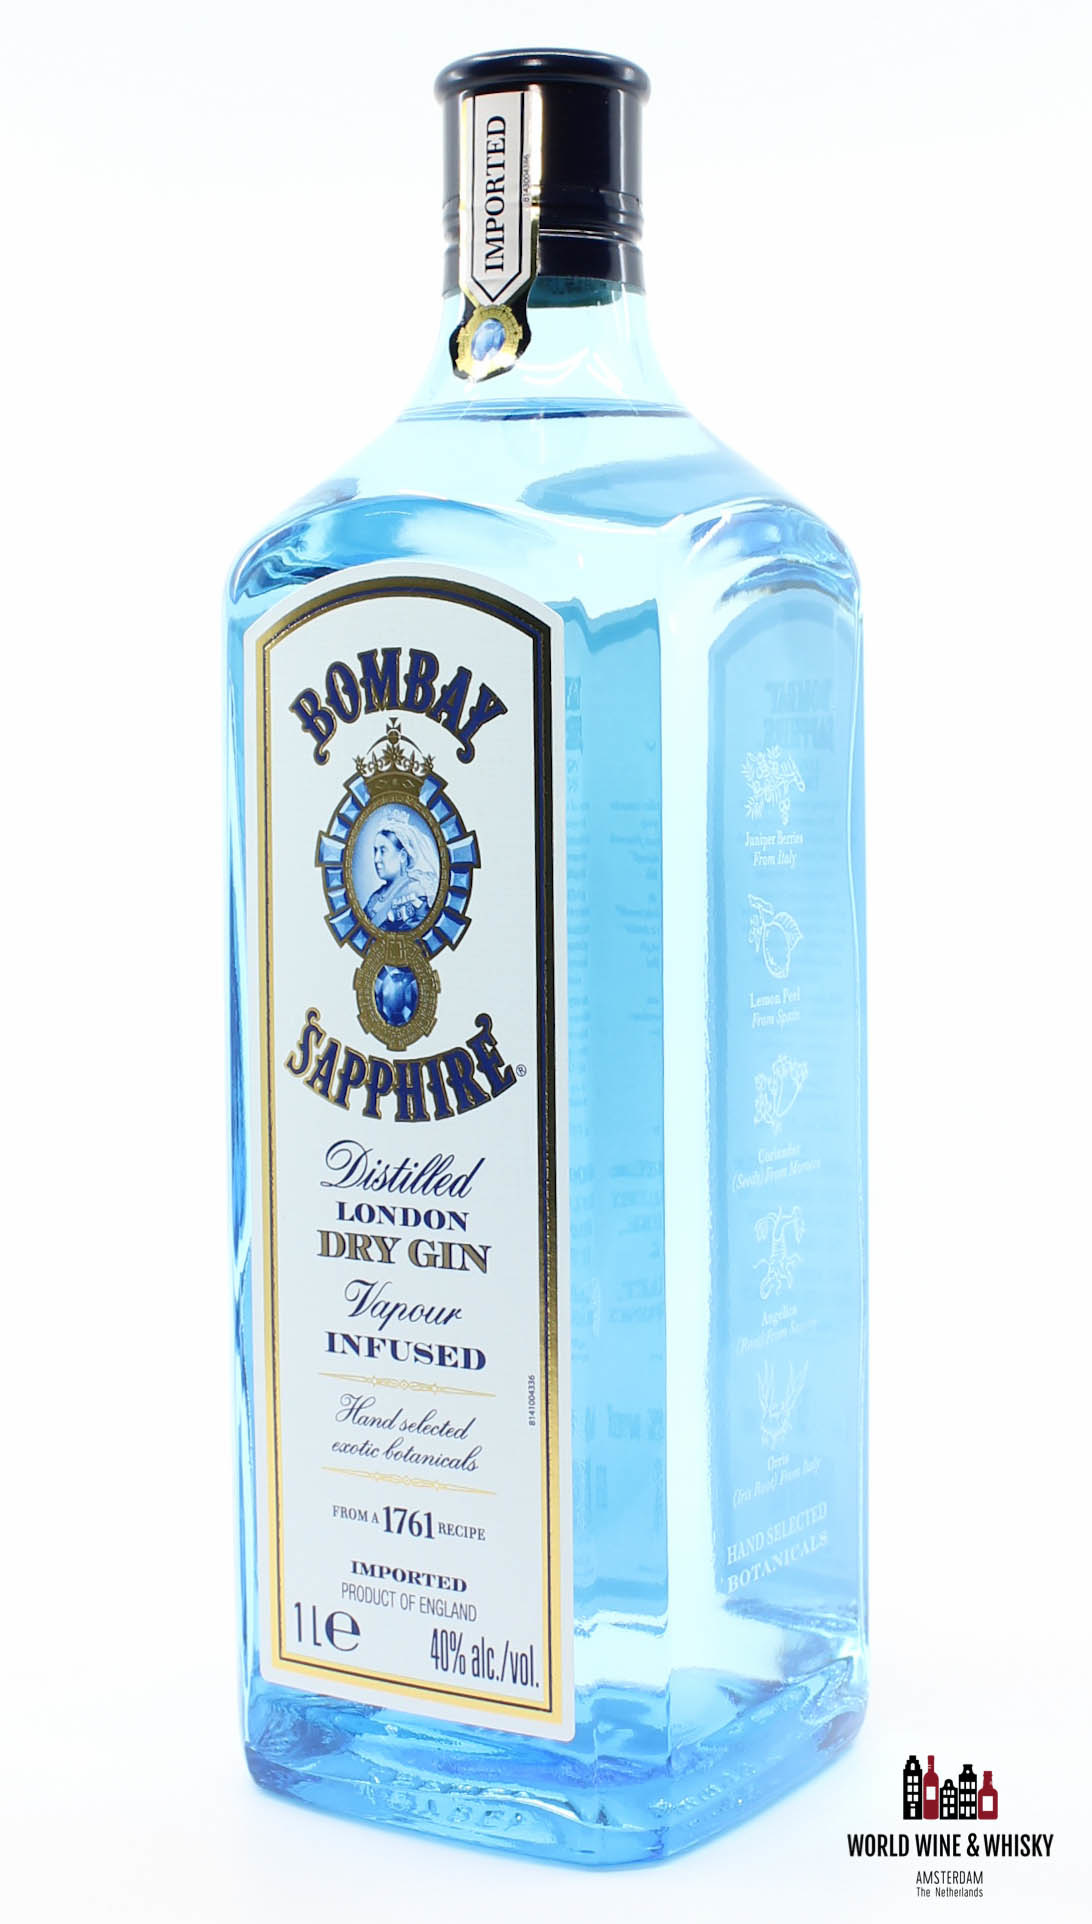 acceptable I complain Gallantry Bombay Sapphire - London Dry Gin 40% 1 Liter - World Wine & Whisky